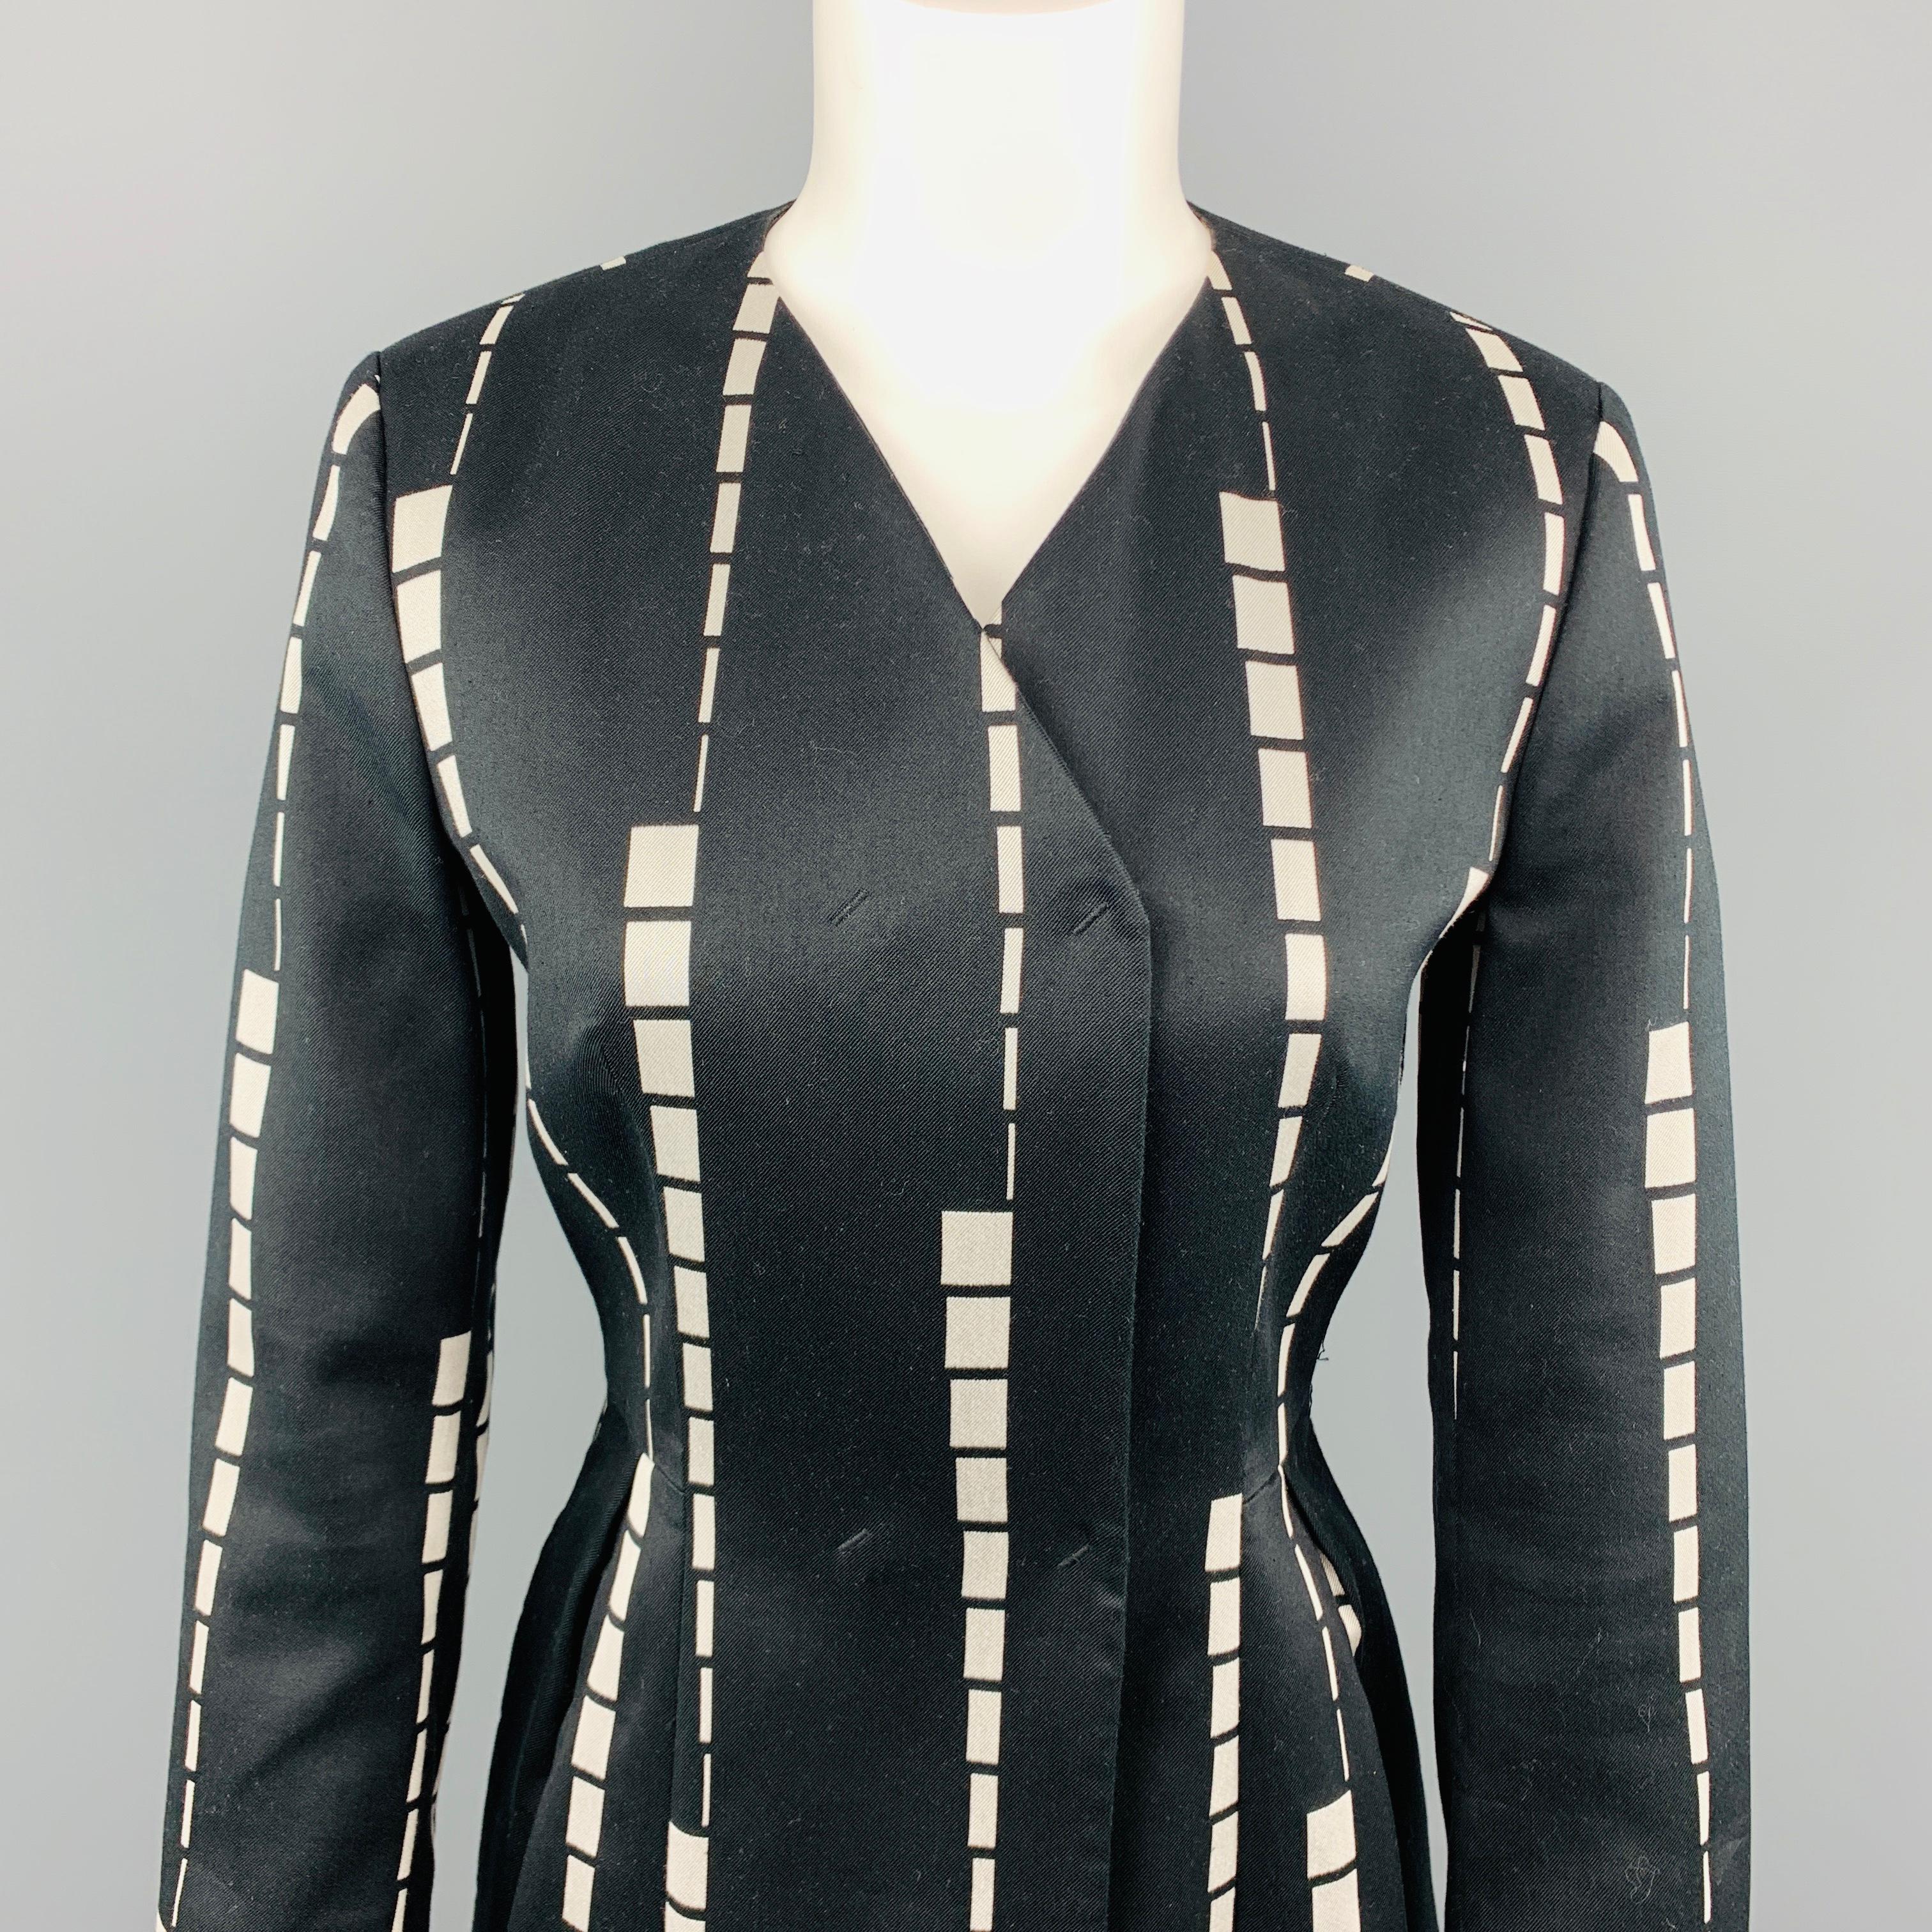 ETRO coat comes in black twill with cream geometric stripe pattern and features a collarless V neck, double breasted, hidden snap closures, and pleated front skirt bottom. Made in Italy.
 
Excellent Pre-Owned Condition.
Marked: IT 42
